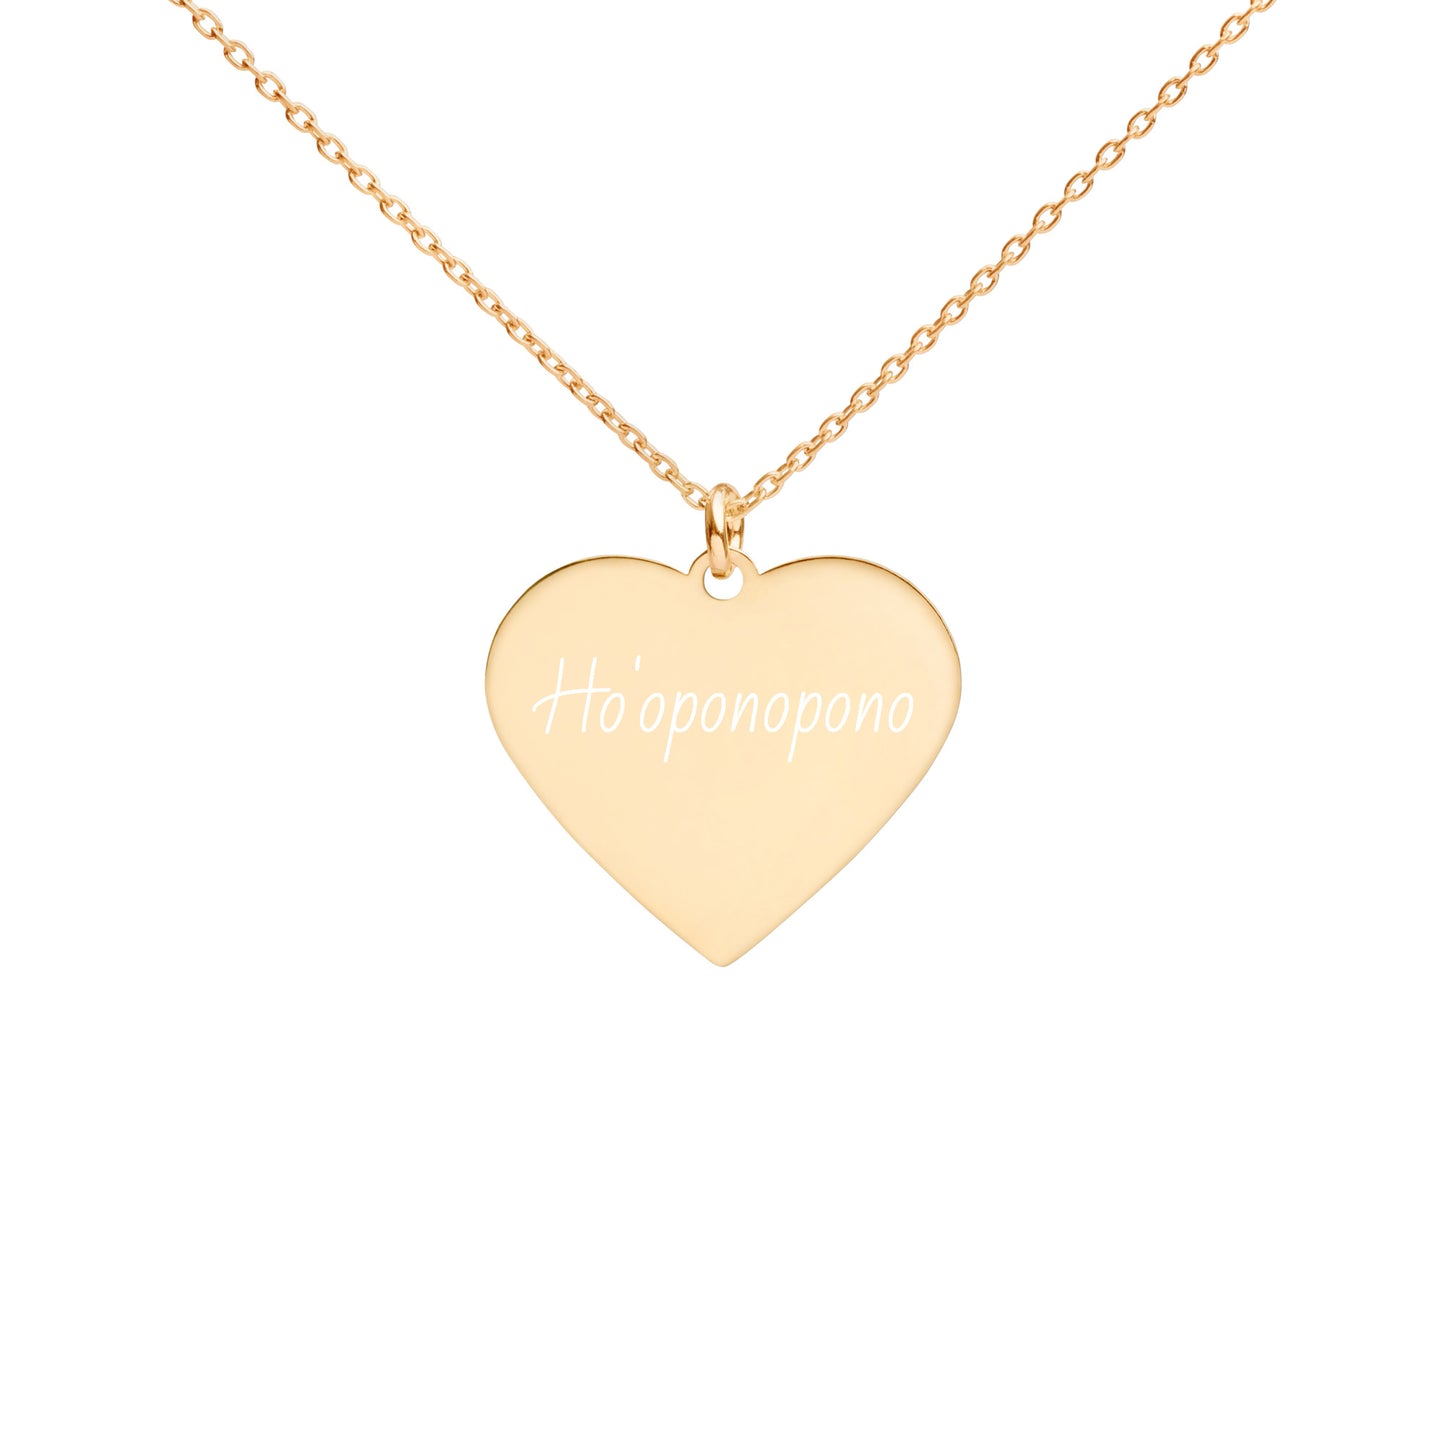 Ho'oponopono Engraved Silver Heart Necklace